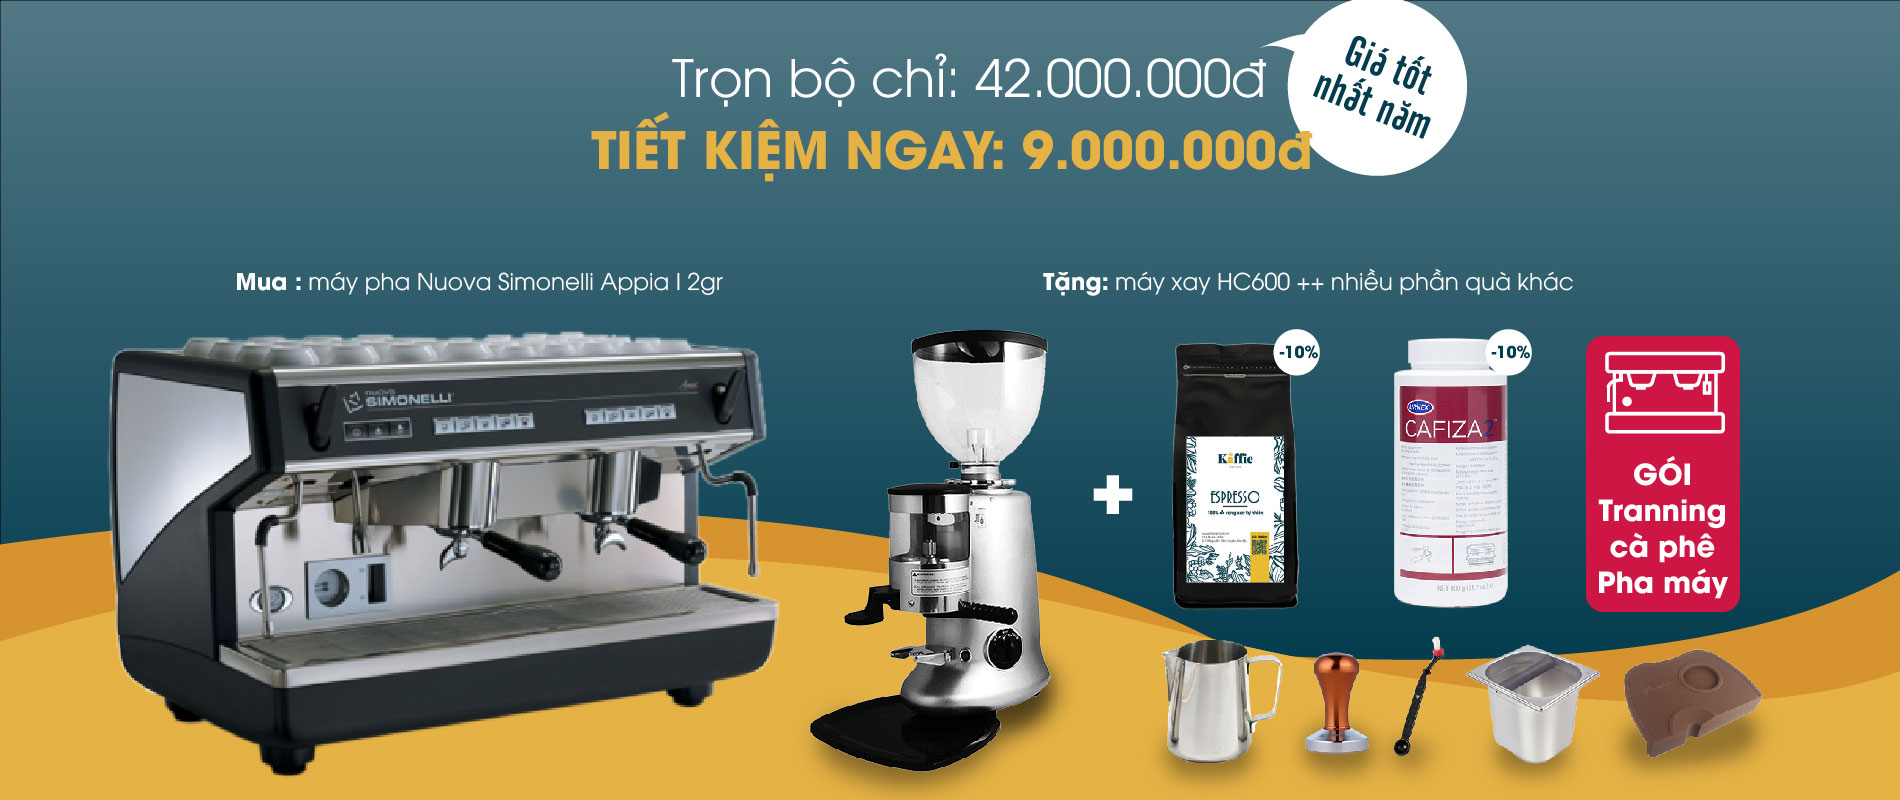 https://phinviet.com.vn/may-pha-ca-phe-nuova-simonelli-appia-i-2-group-automatic-new-95/